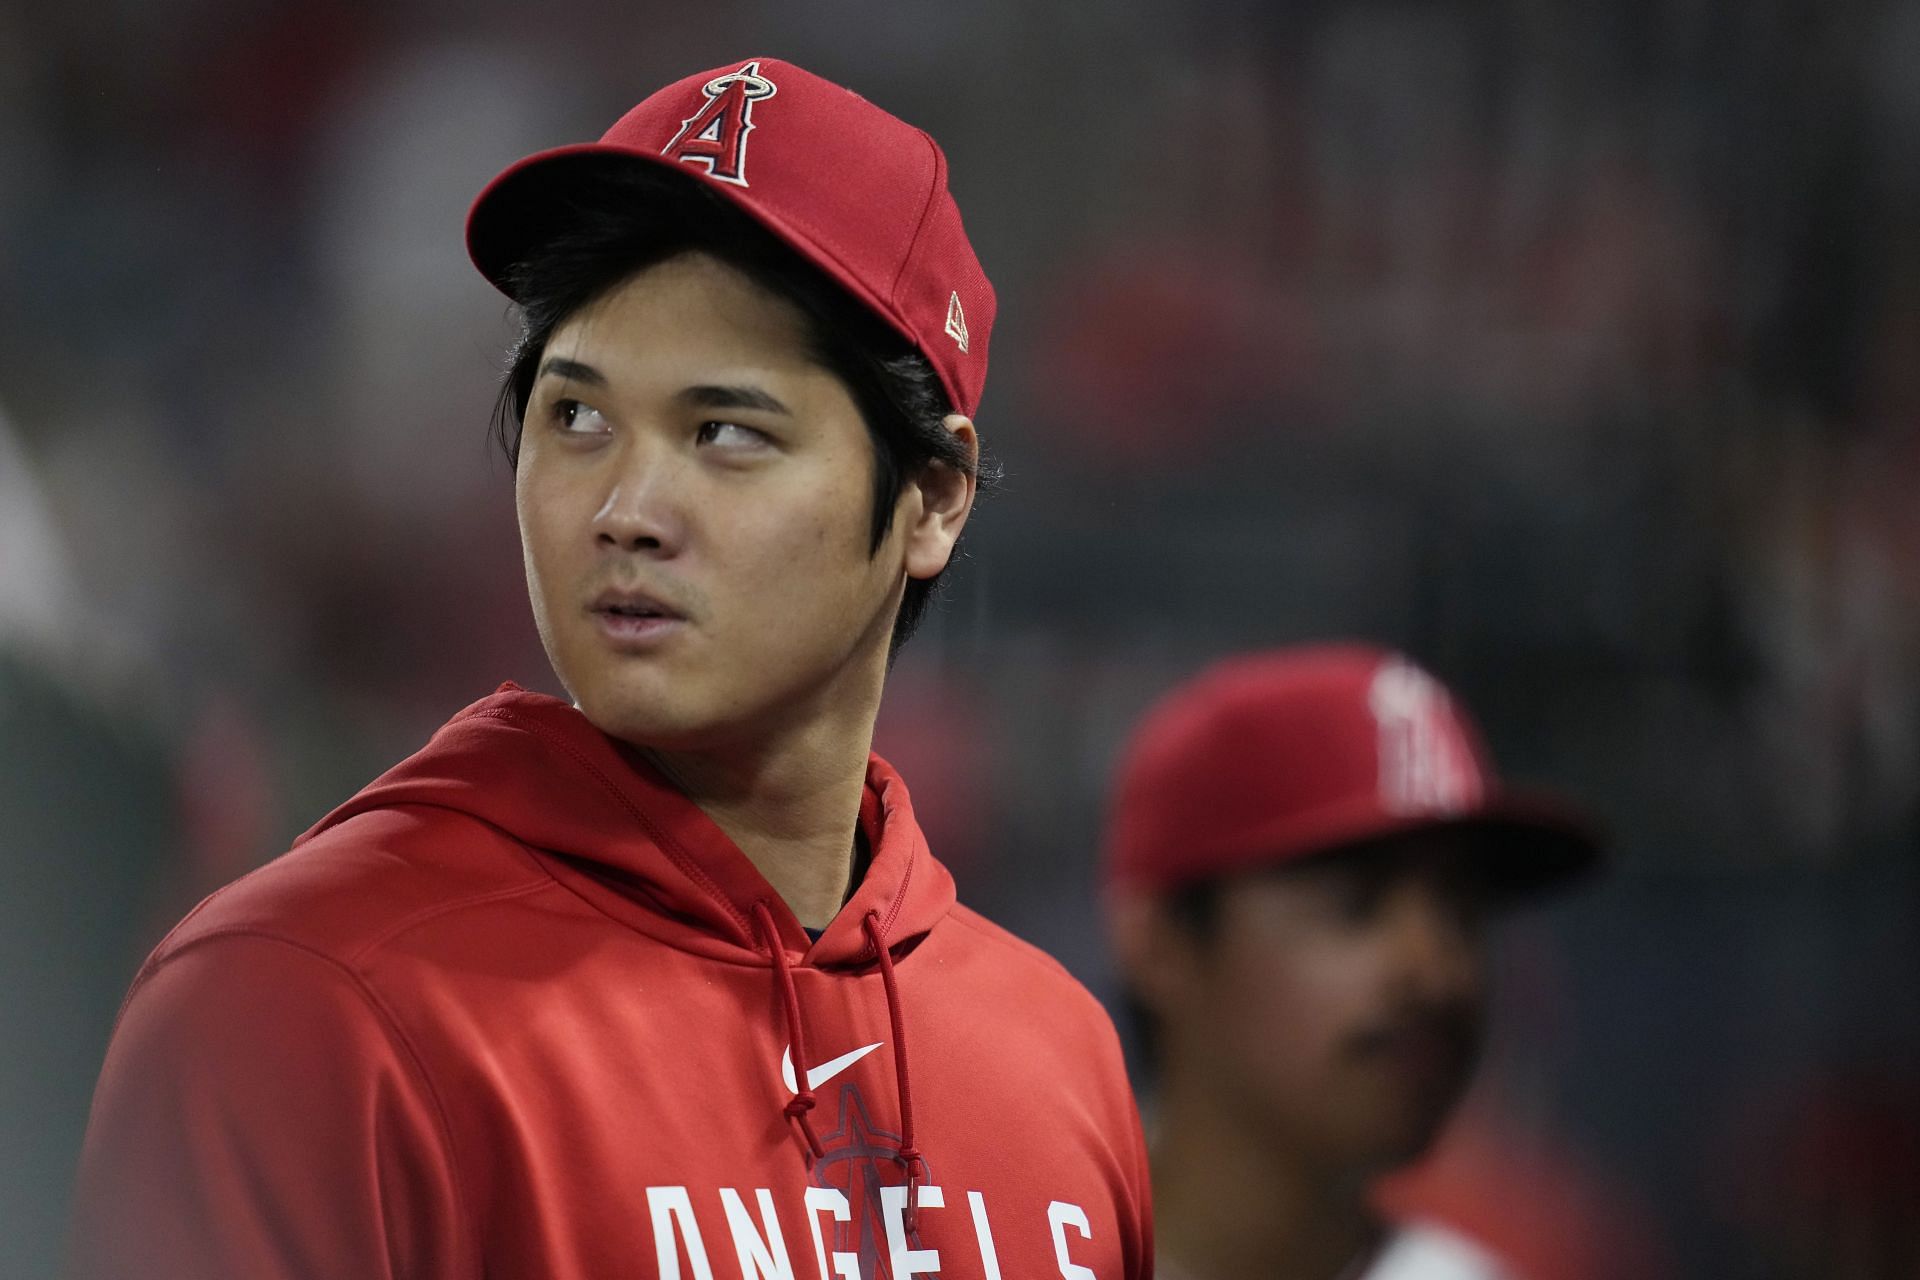 Shohei Ohtani could surprise everyone